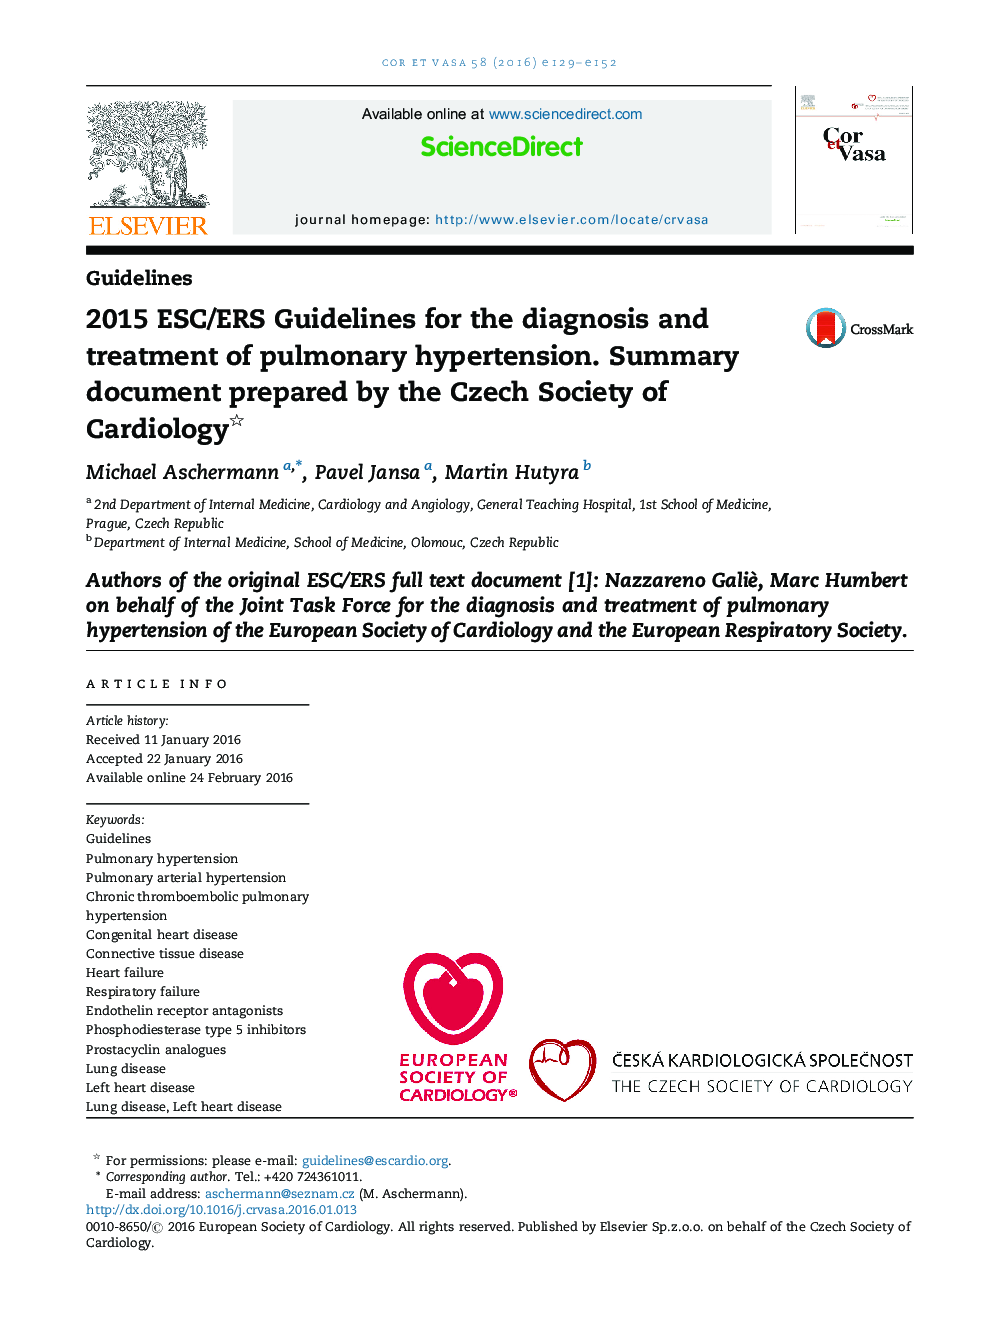 2015 ESC/ERS Guidelines for the diagnosis and treatment of pulmonary hypertension. Summary document prepared by the Czech Society of Cardiology